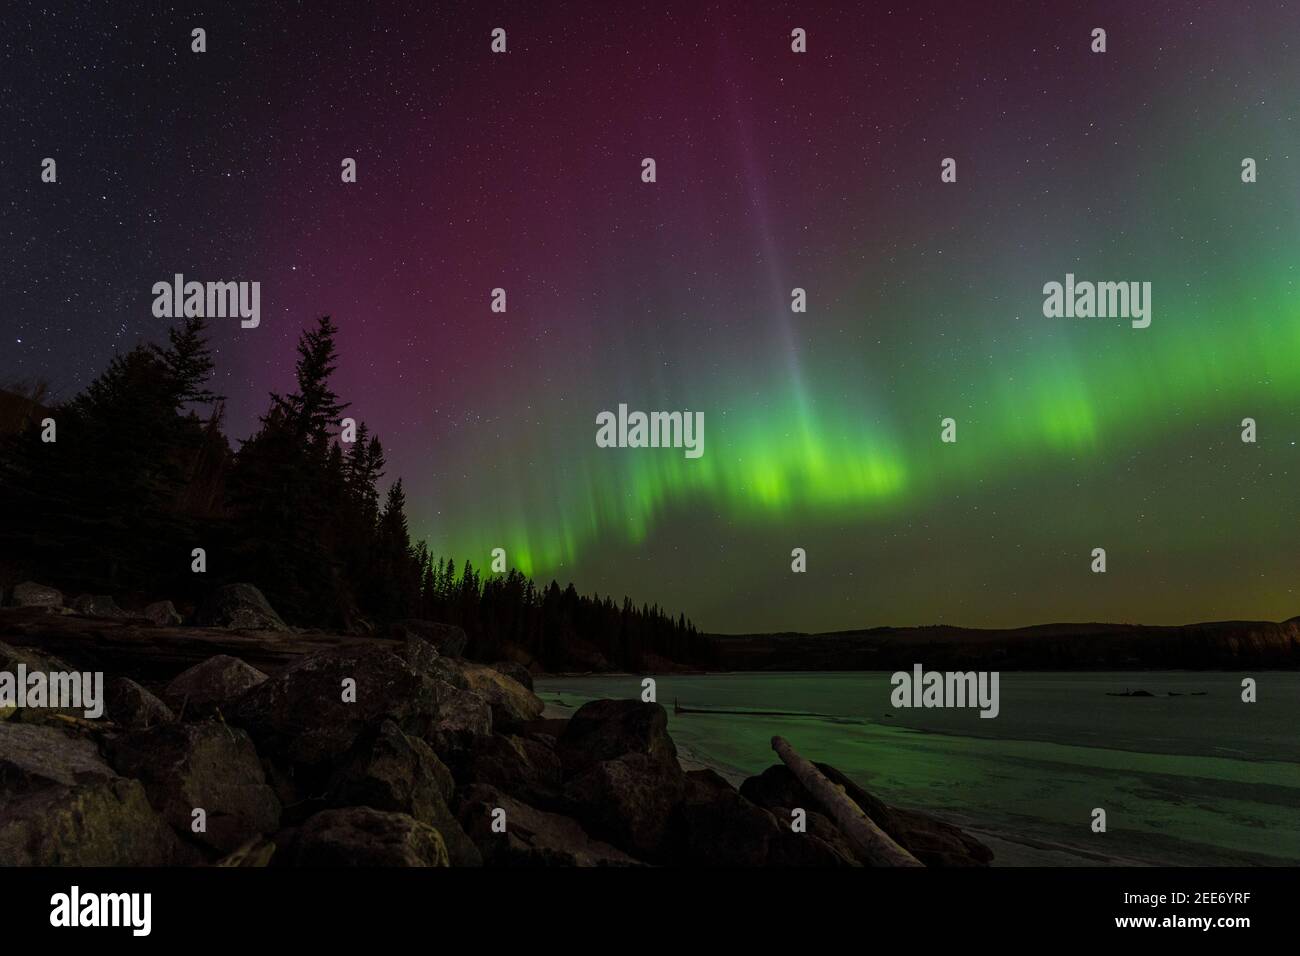 Aurora Borealis or Northern Lights from a lake during a winter night in Canada Stock Photo